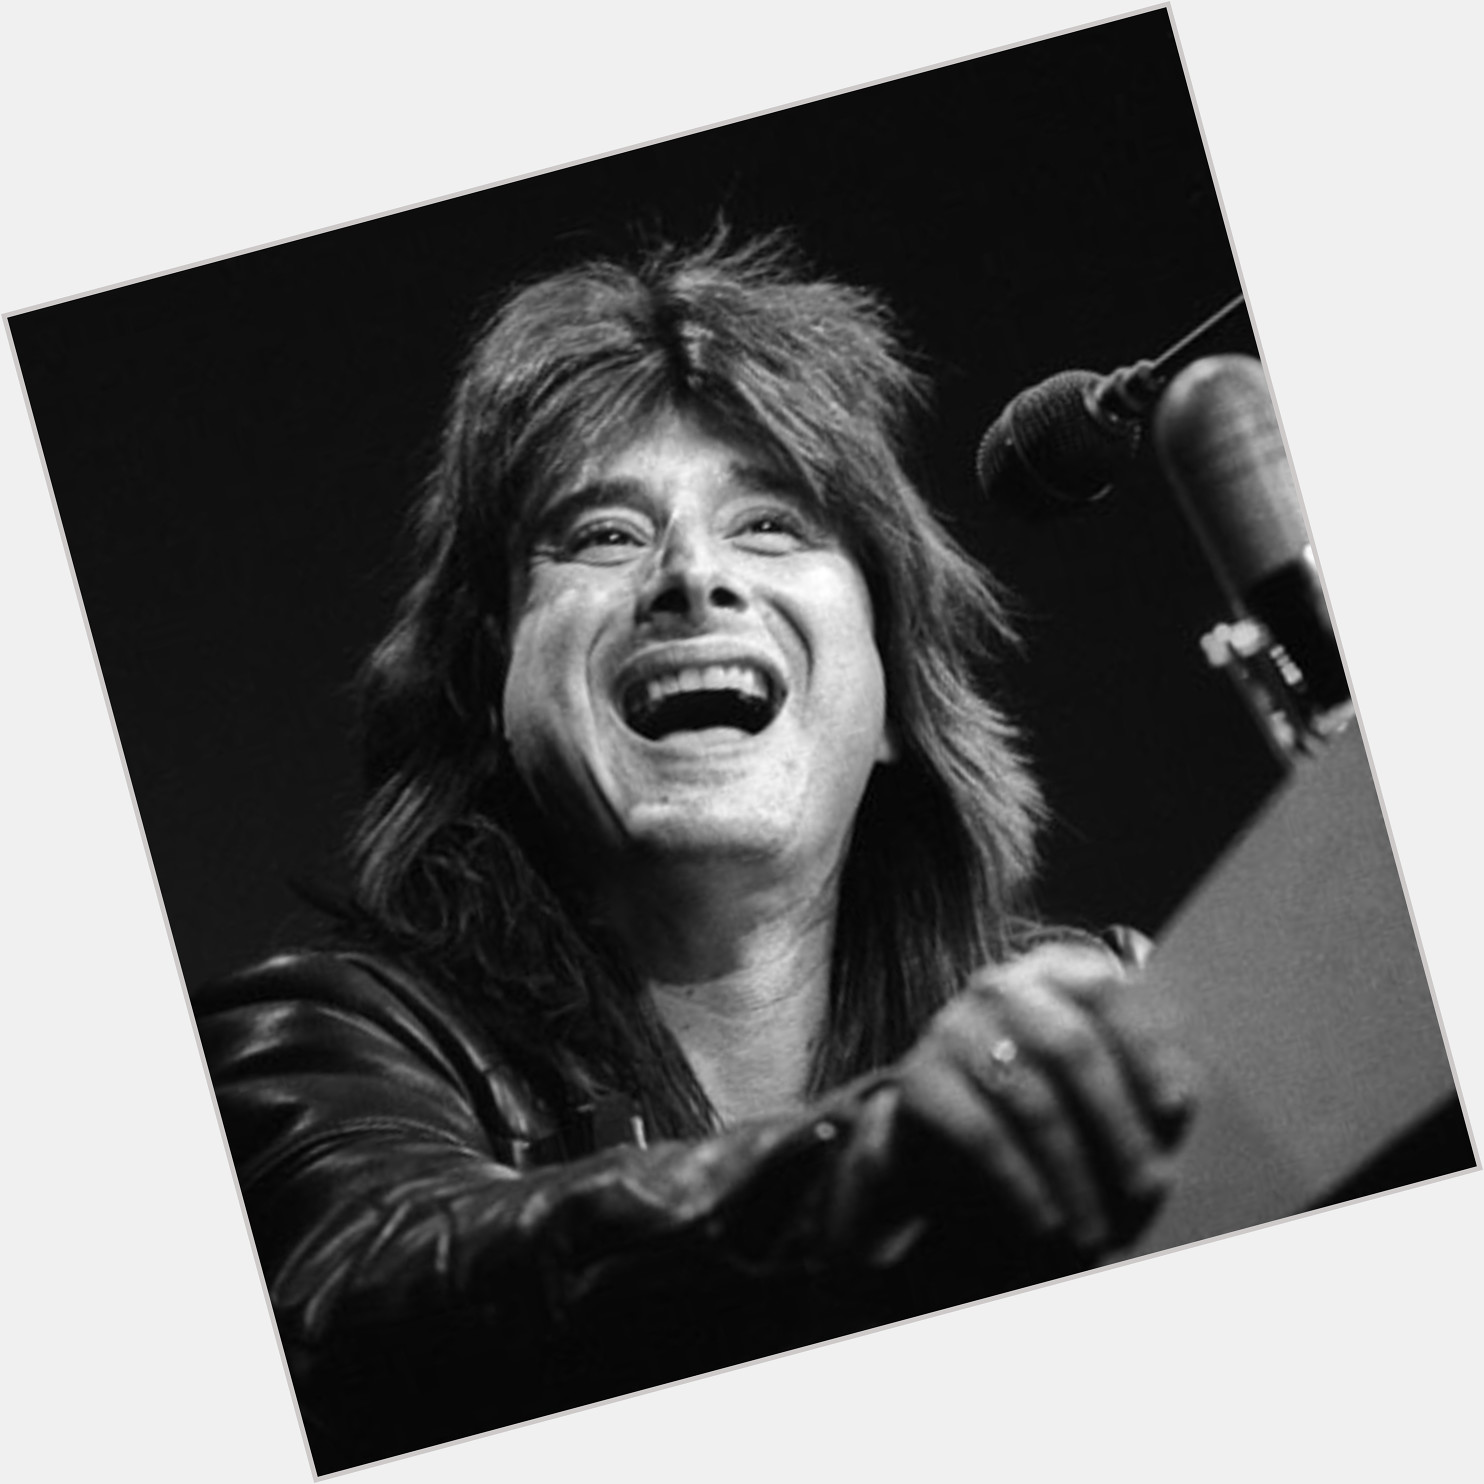 Happy birthday to musical royalty Steve Perry. 

His voice is a national treasure. 